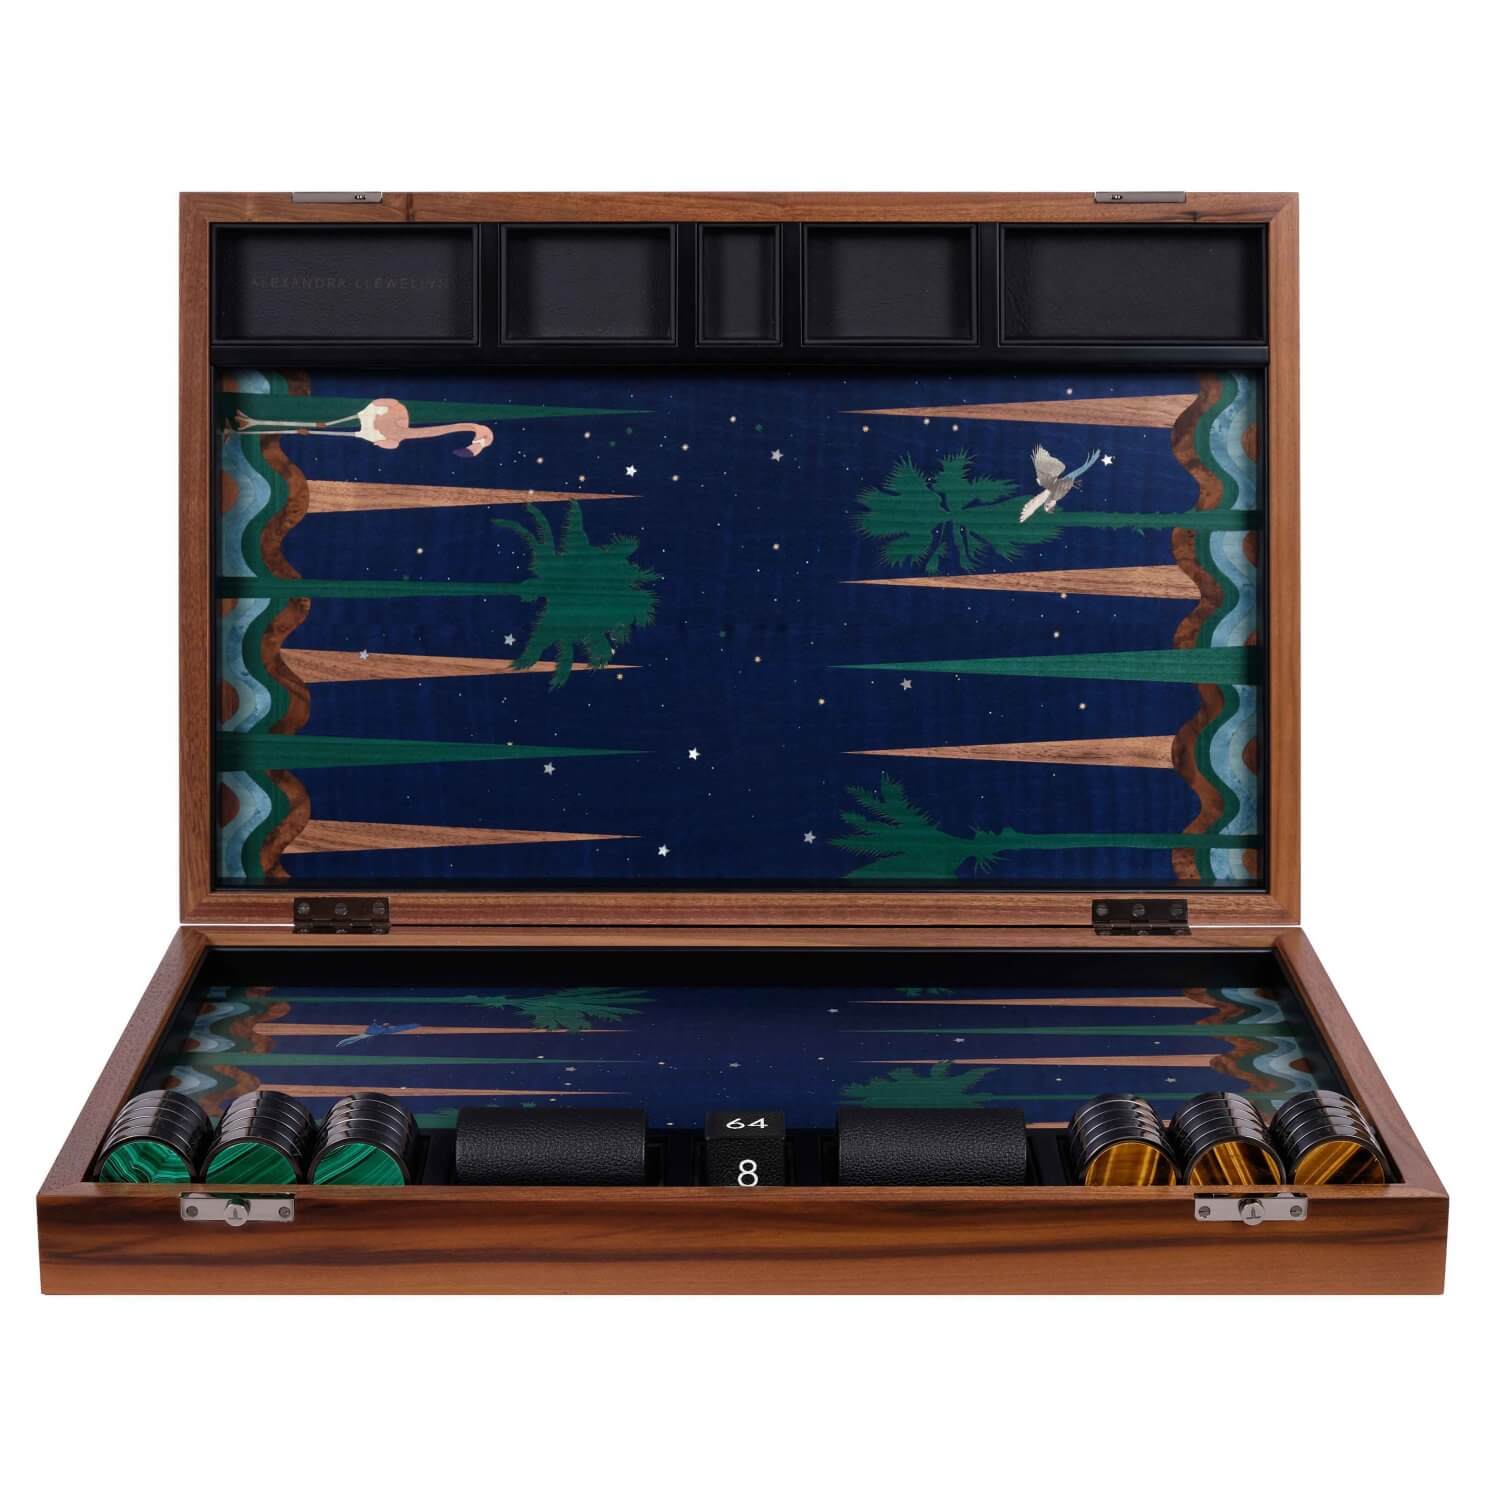 Midnight Marquetry backgammon set upright with lid open